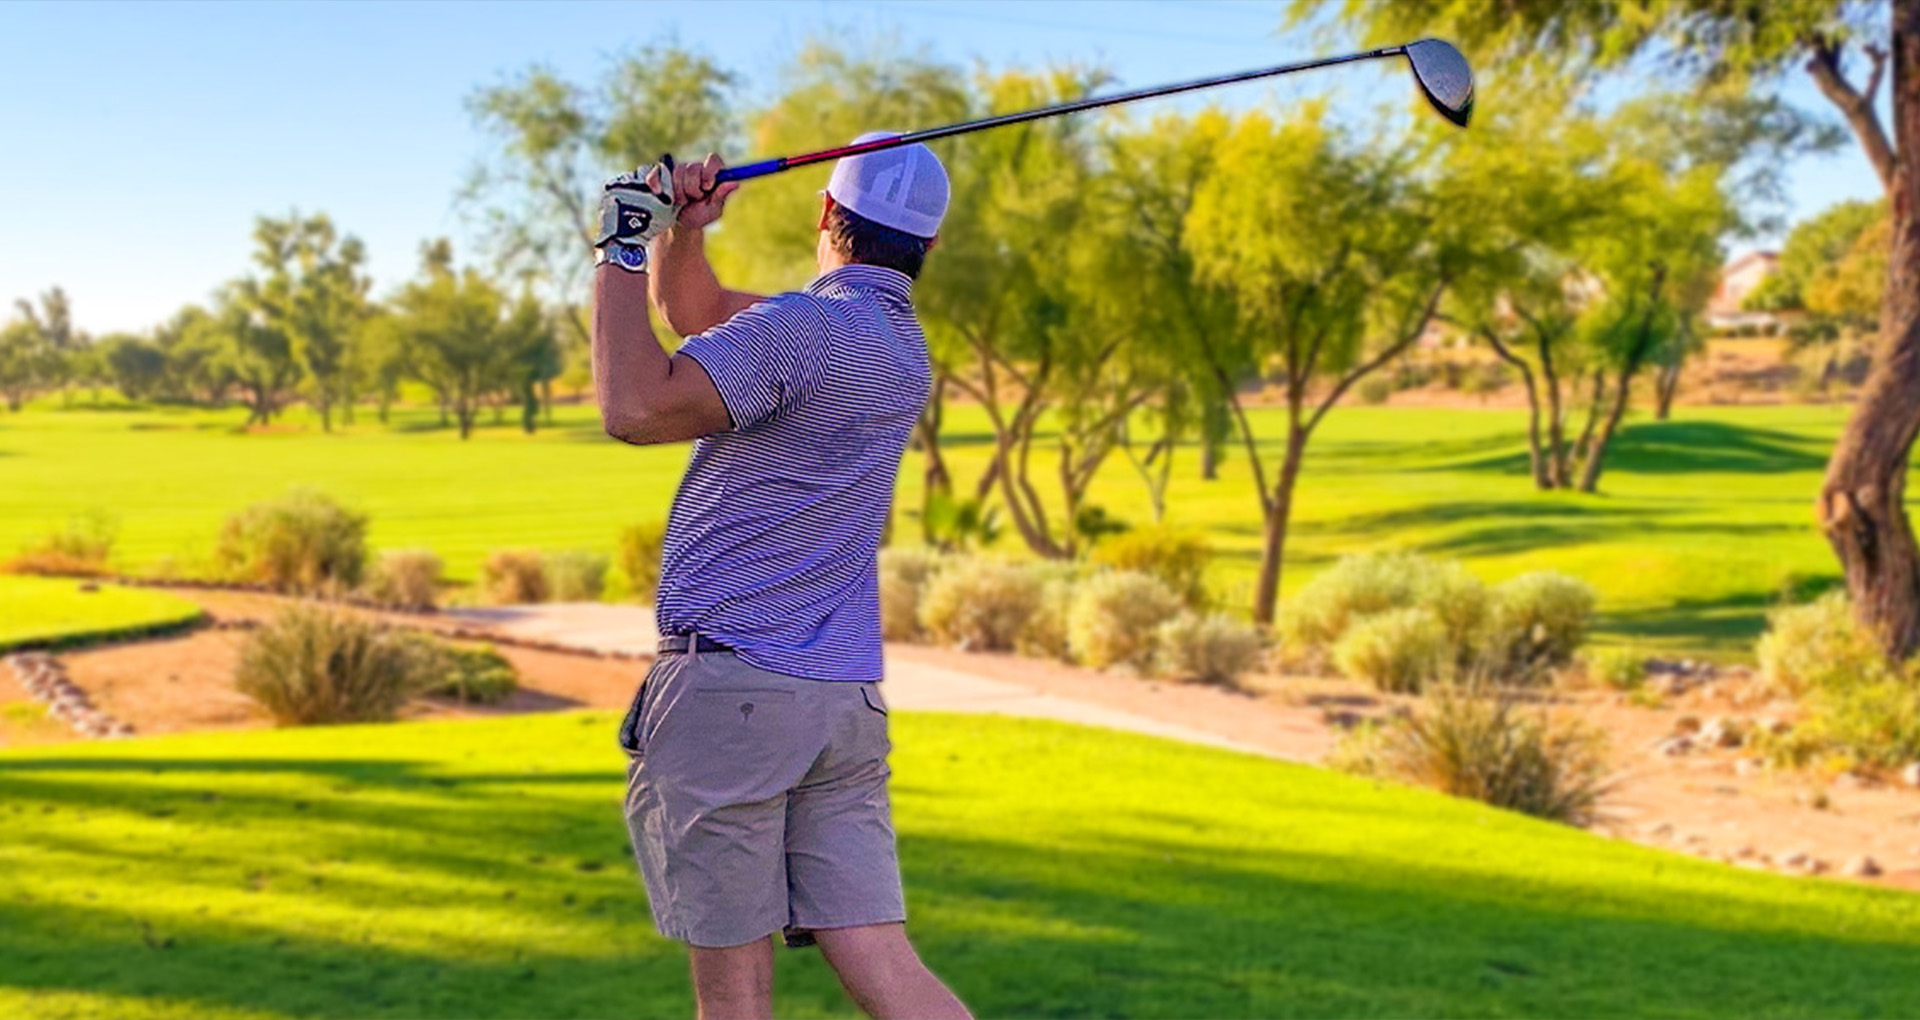 Photo from the 2021 Firetag Golf Tournament. A golfer is pictured mid-swing on the golf course.